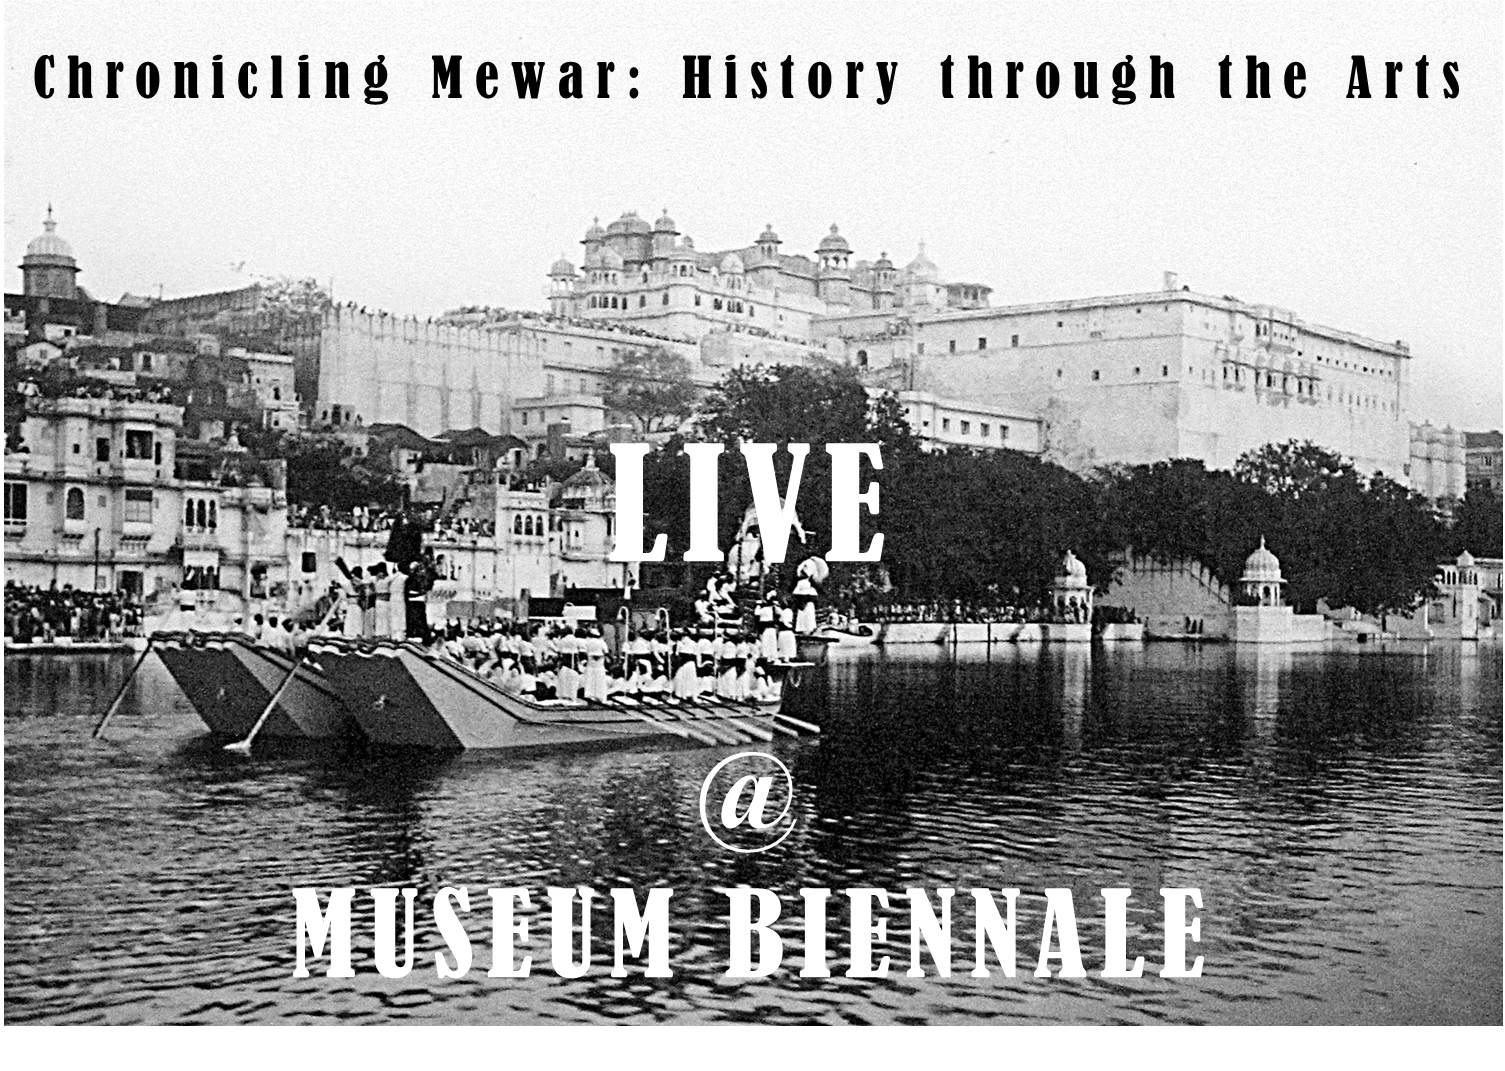 Watch the History of Mewar unfolding LIVE at the Museum Biennale from 22-28 March